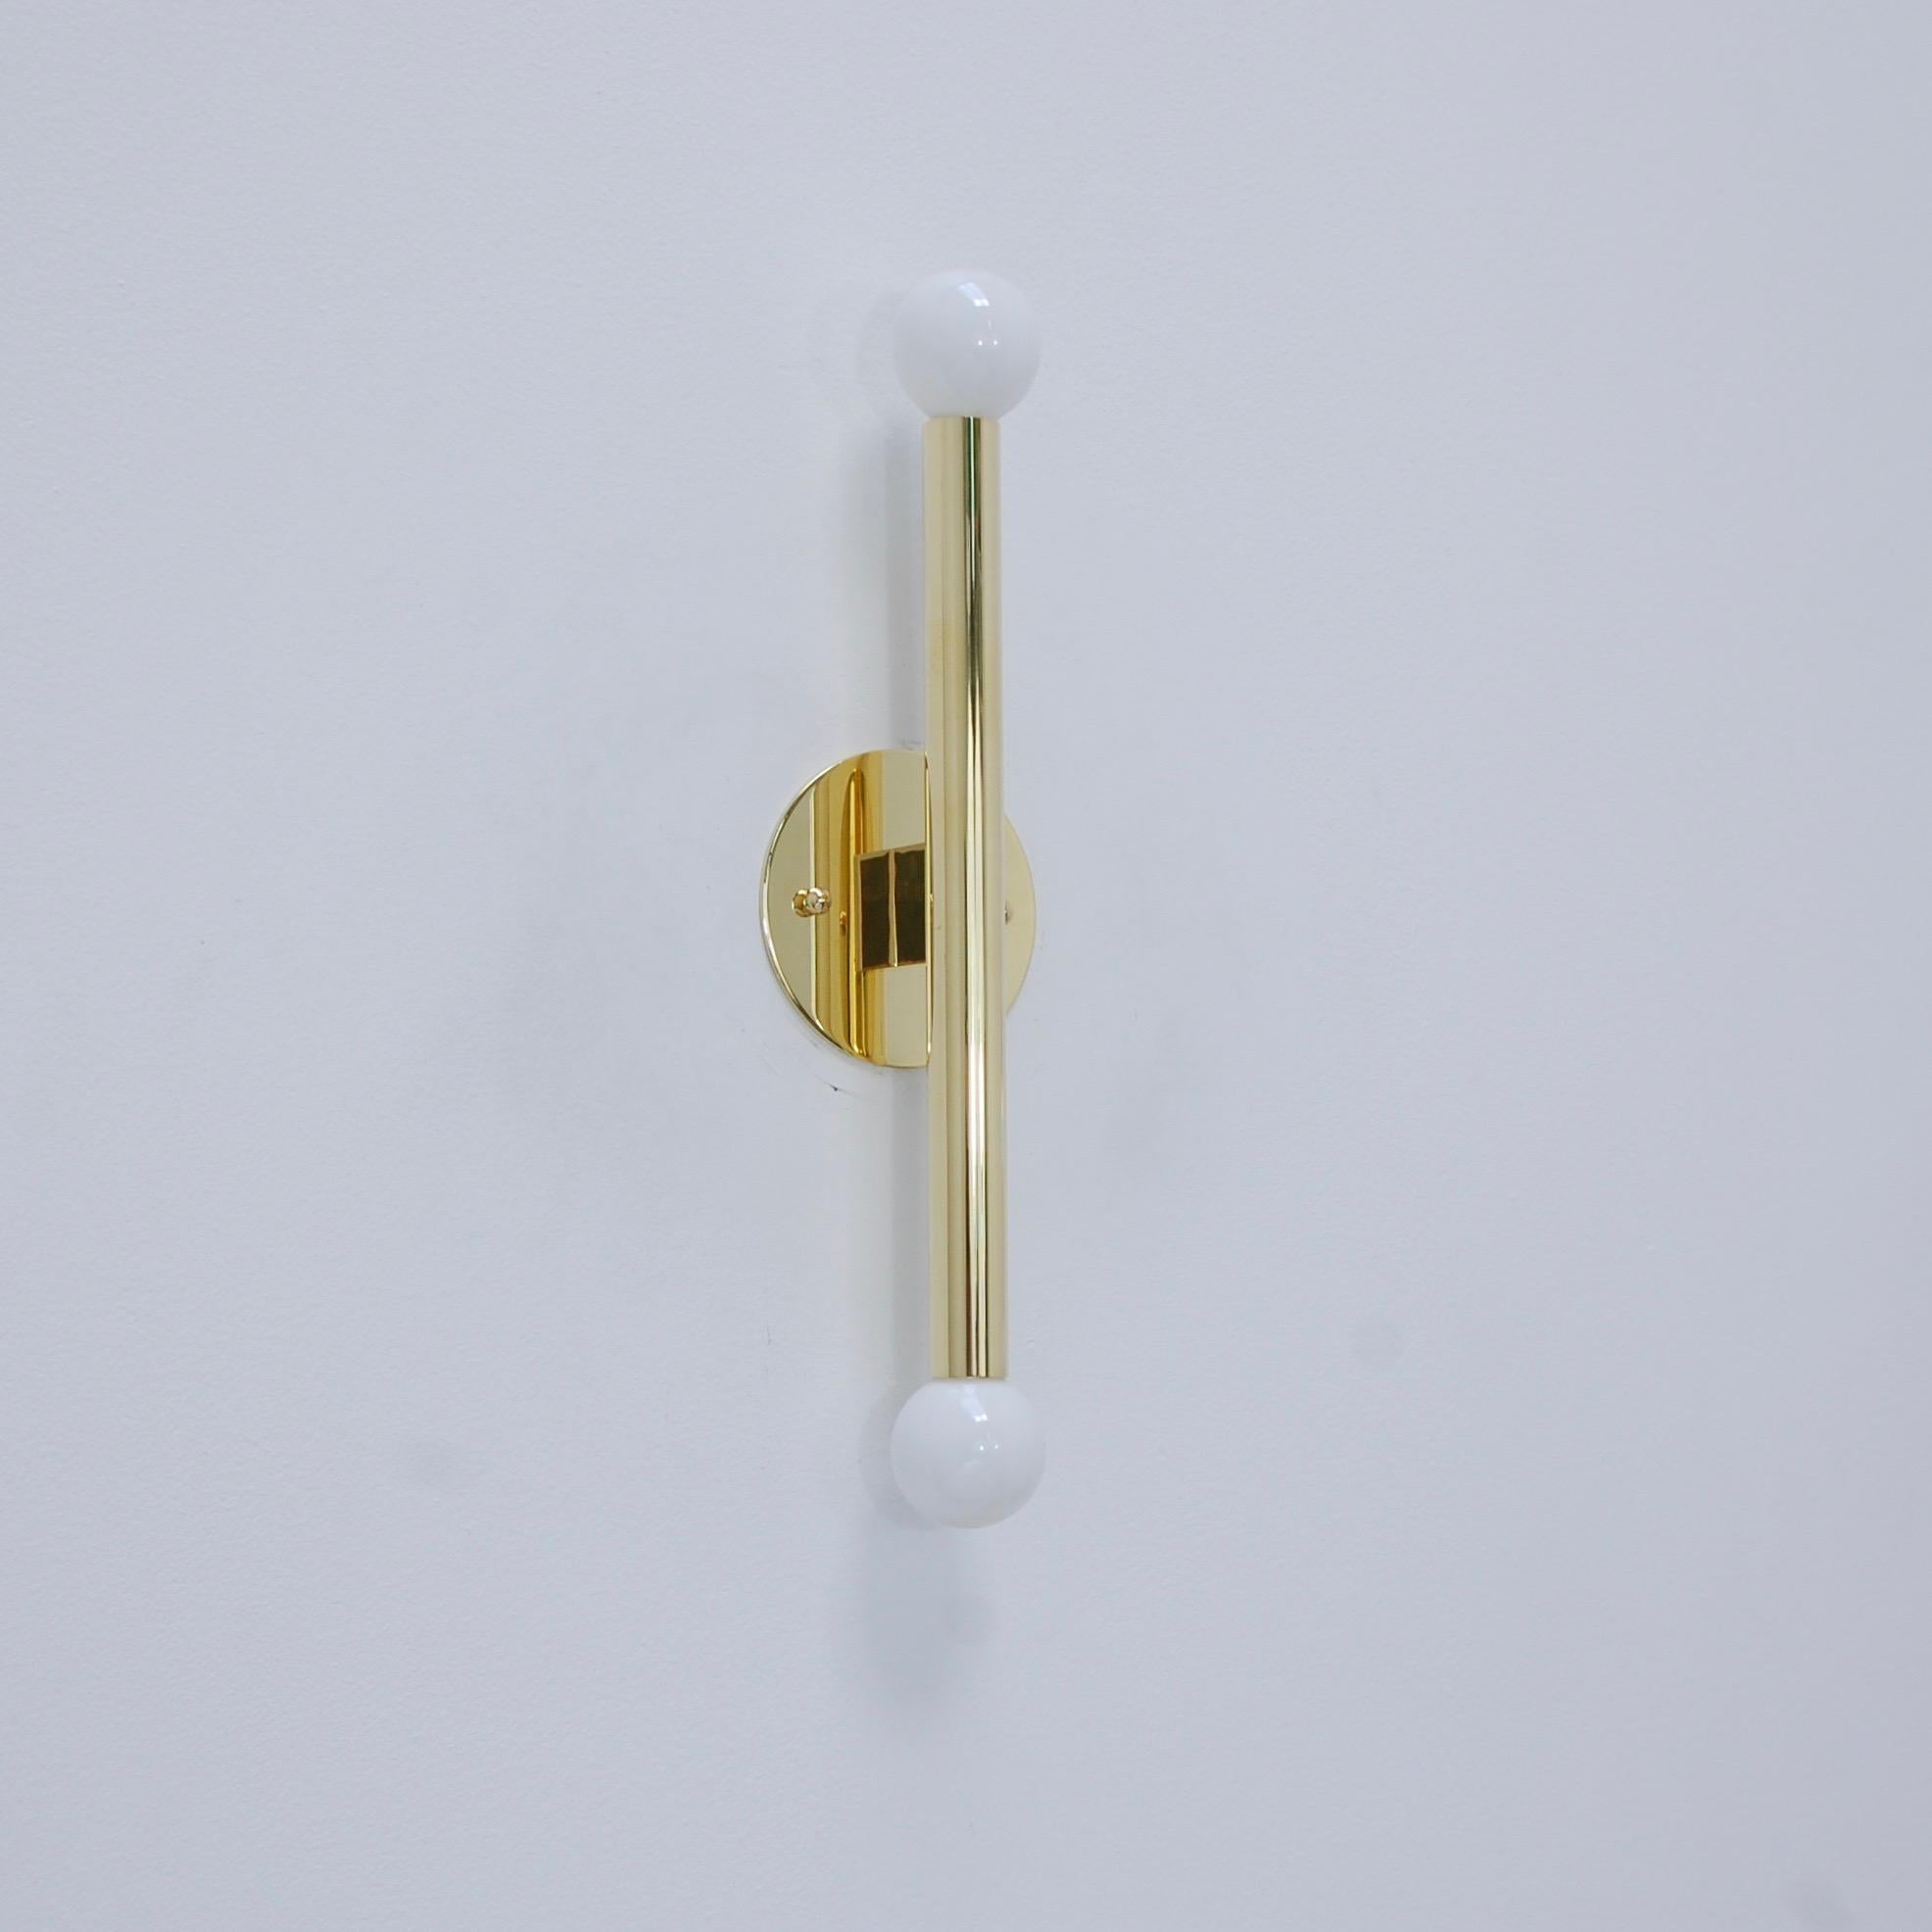 The LUstick sconce is a single brass tubular sconce that is part of our Lumfardo Luminaires contemporary collection. The all brass LUstick sconce is finished in a light patient brass. Inspired by 1950s Italian midcentury design, this sconce can be